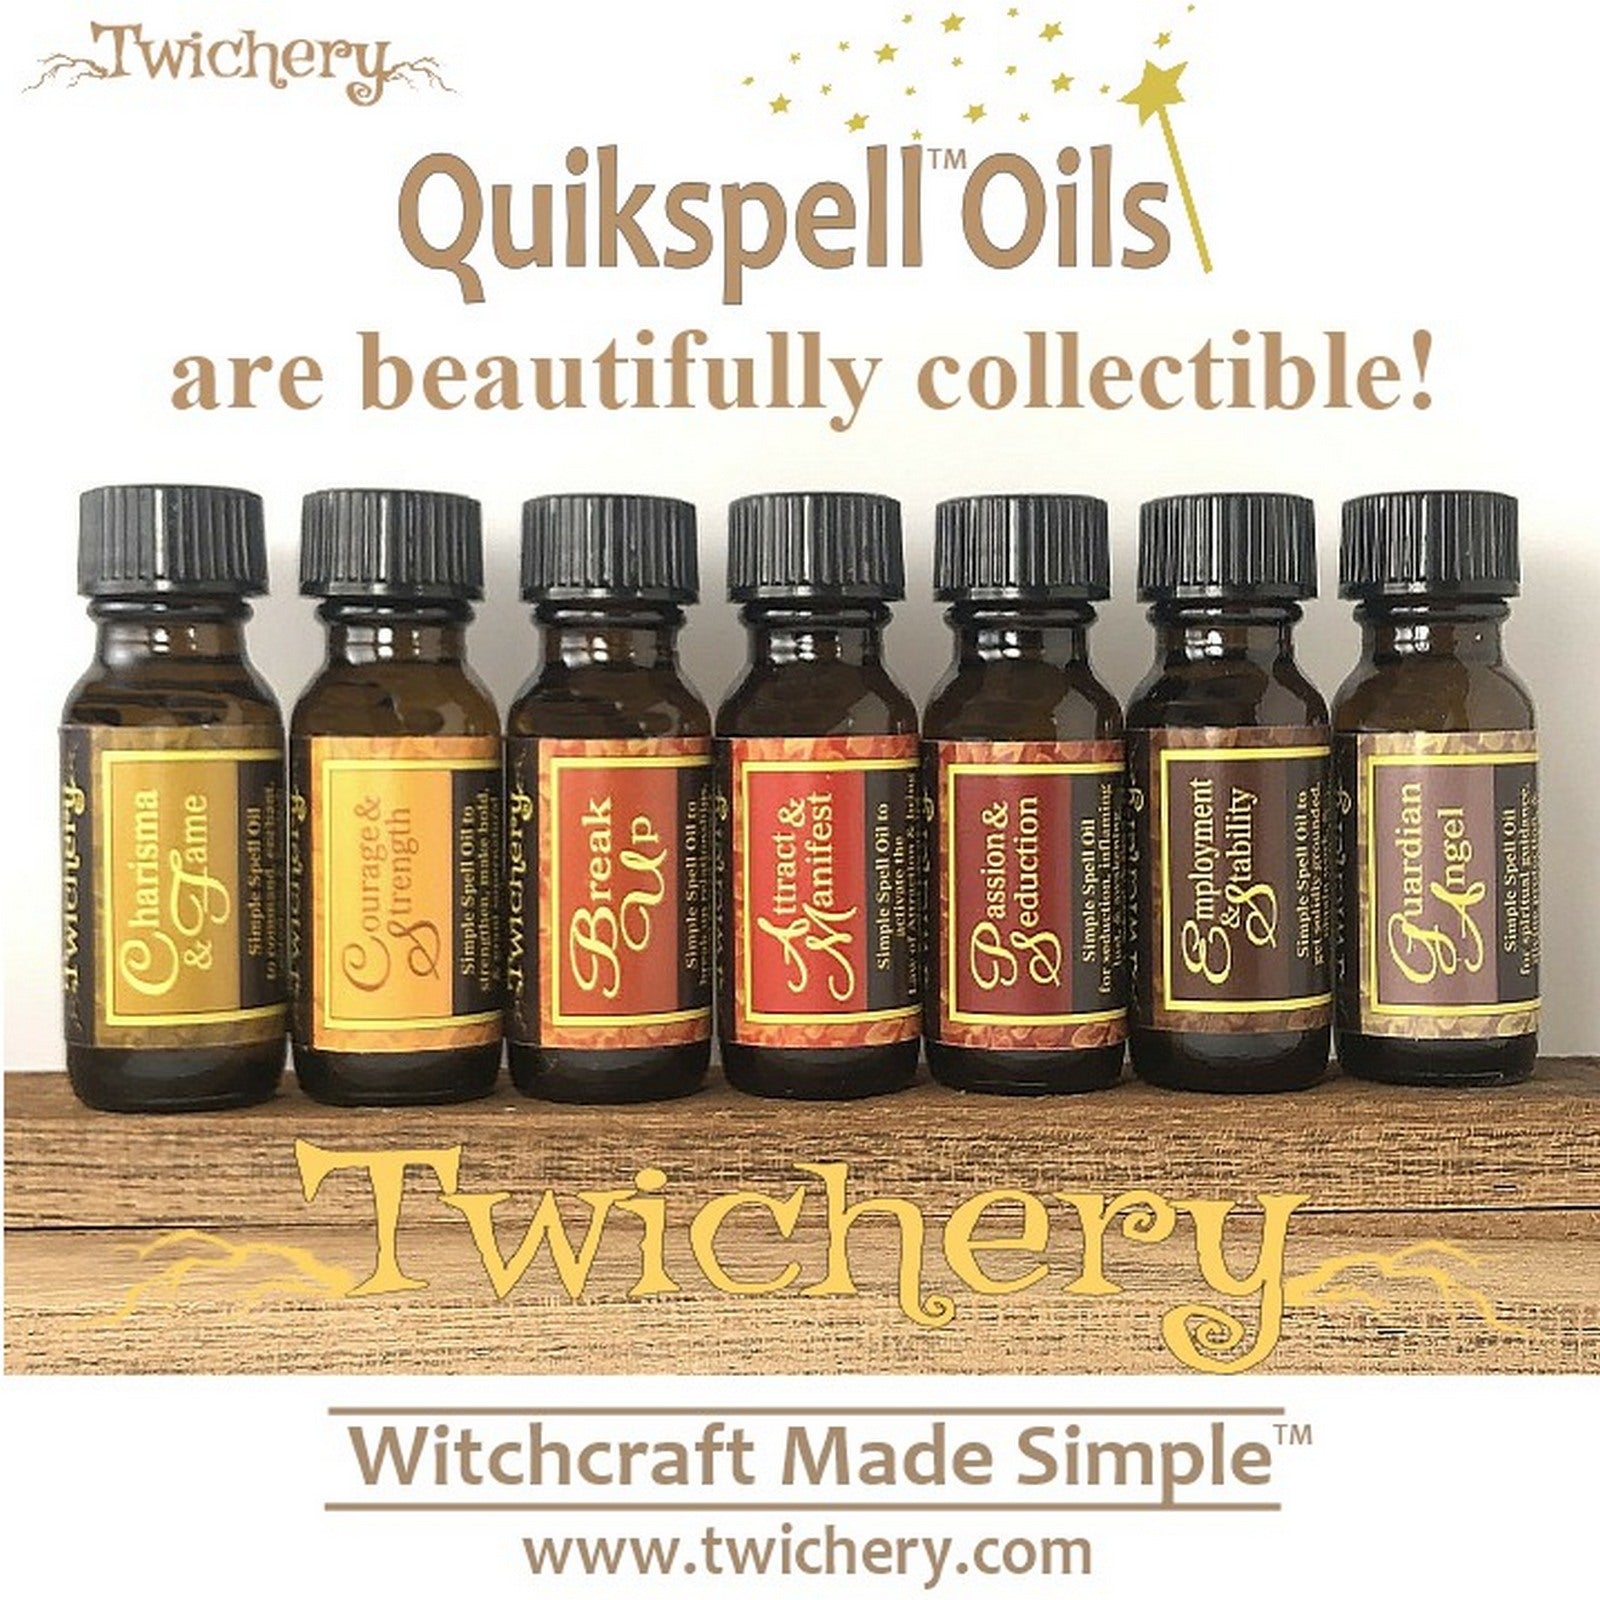 Collect all 24 Twichery Quikspell Oils for all your magickal needs. Hoodoo, Voodoo, Wicca, Witchcraft Made Simple